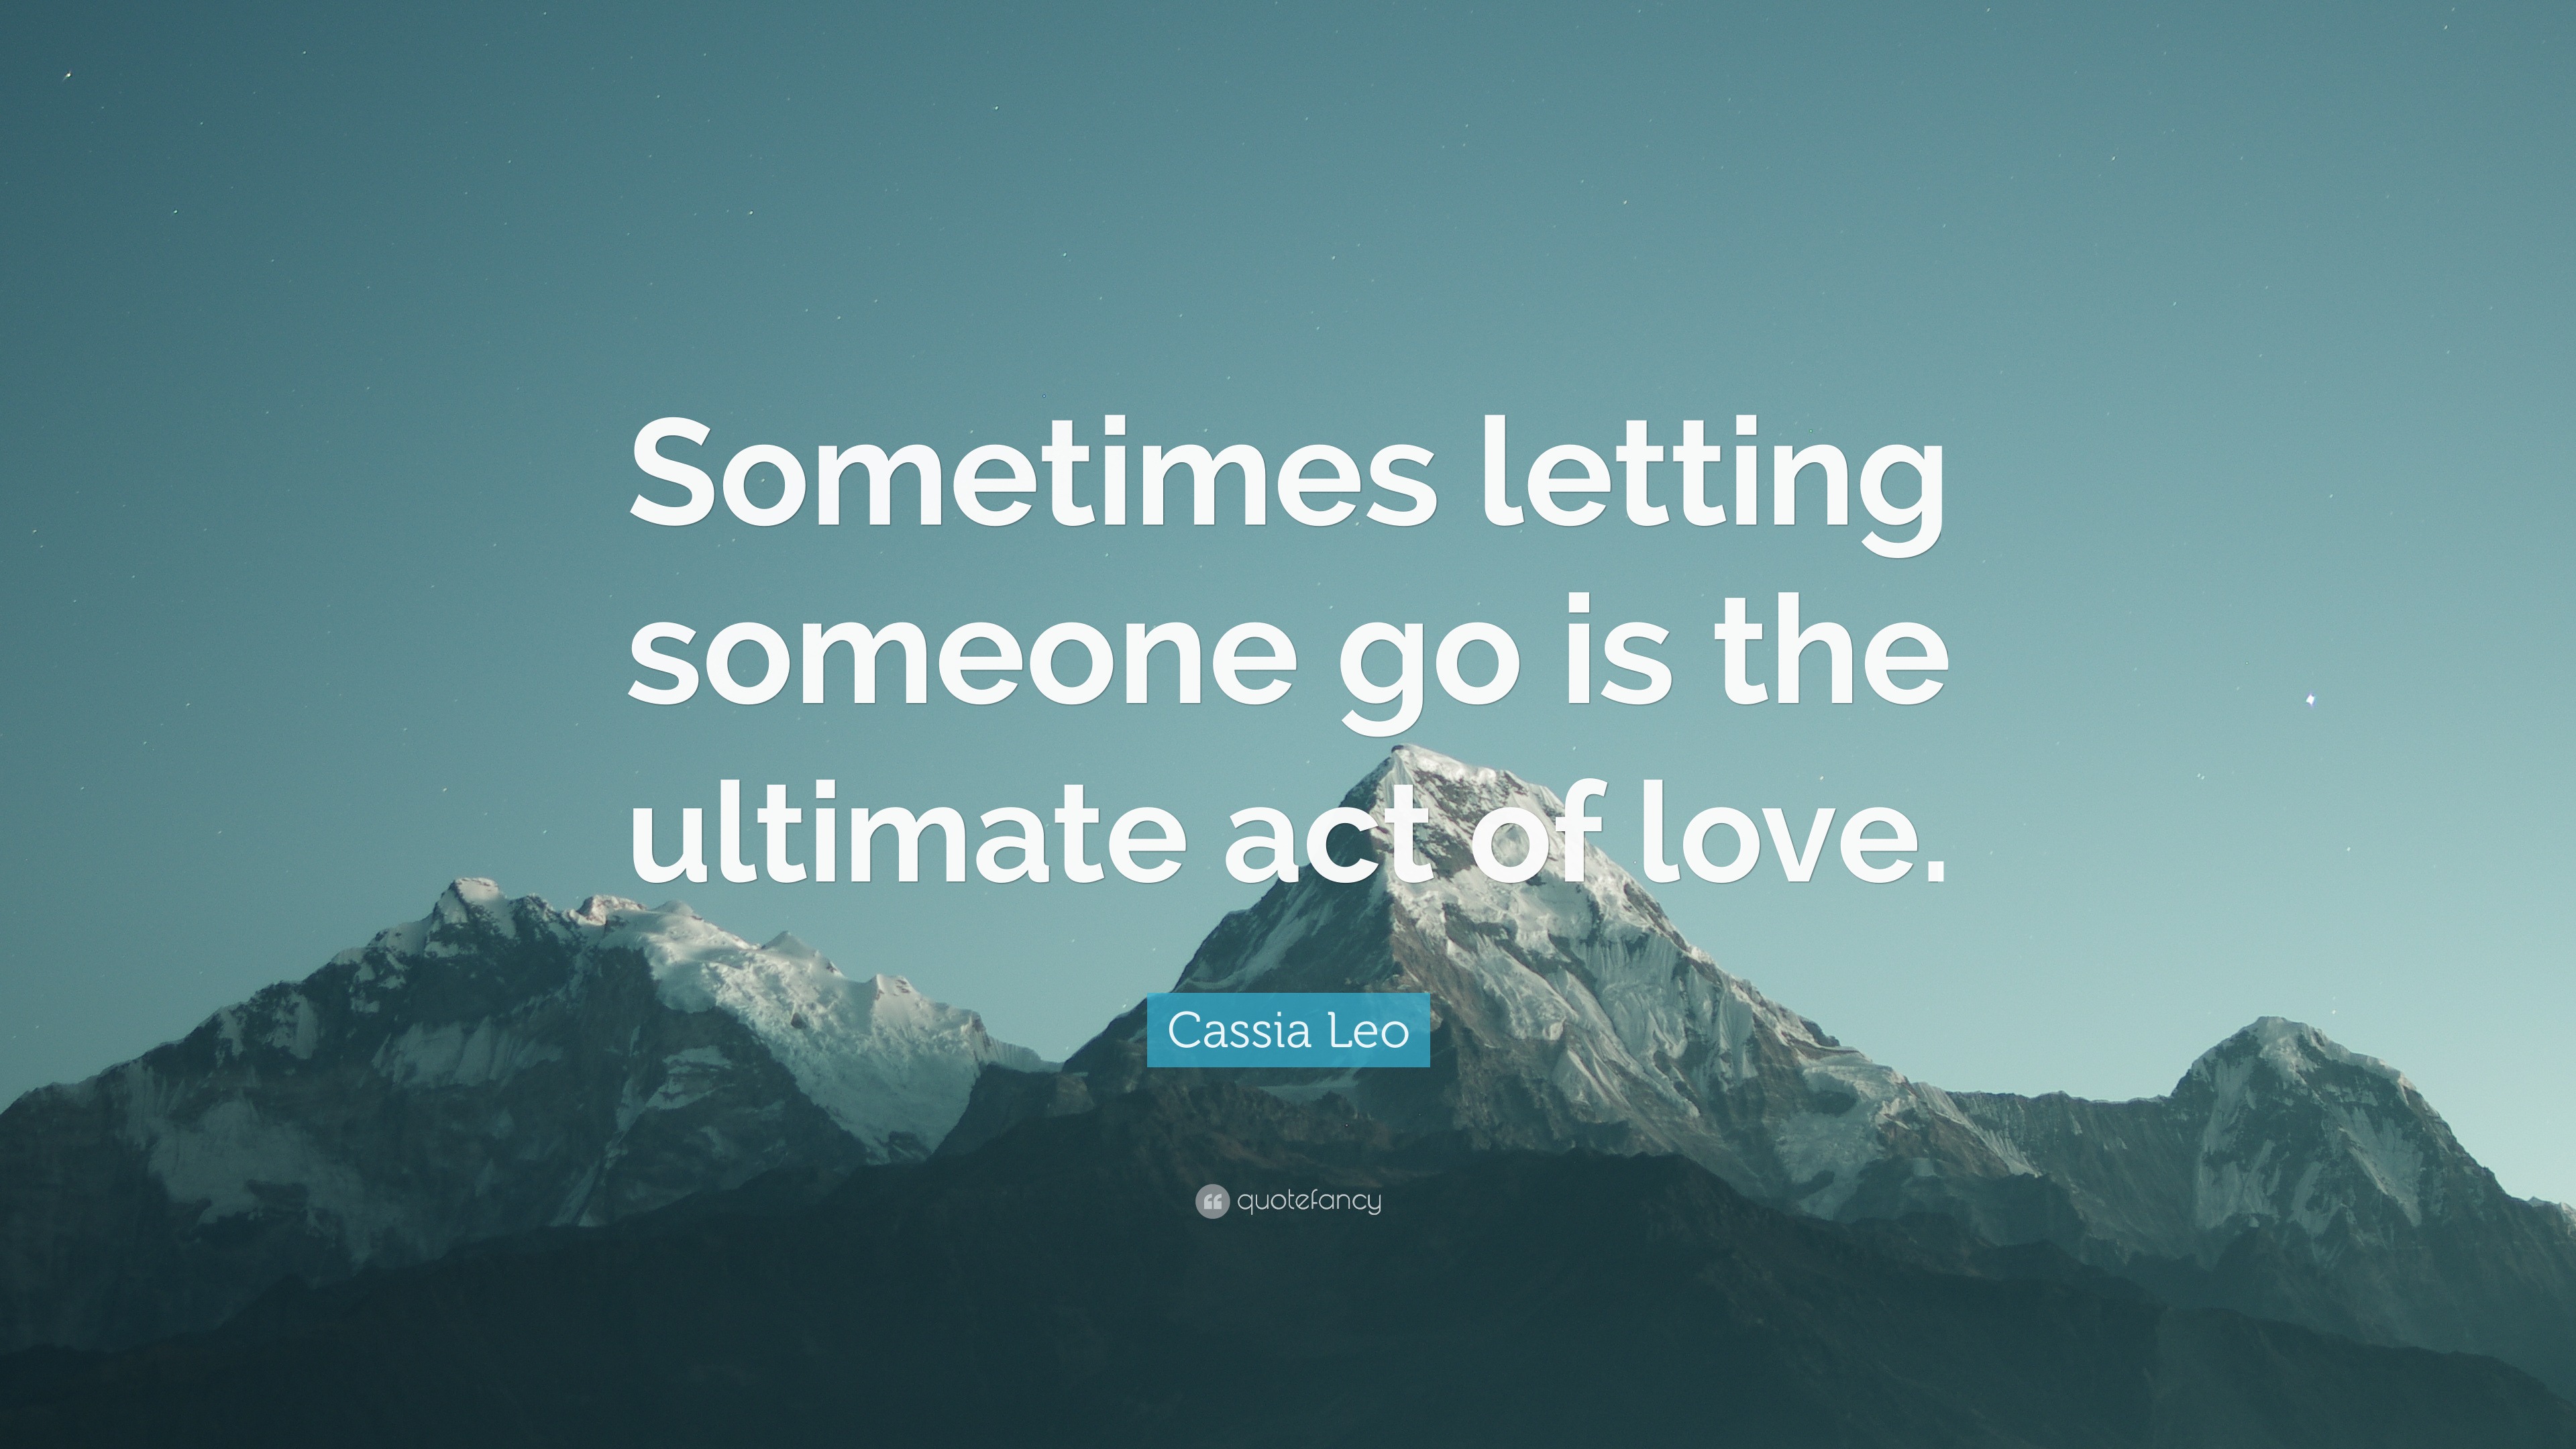 Cassia Leo Quote: “Sometimes letting someone go is the ultimate act of ...